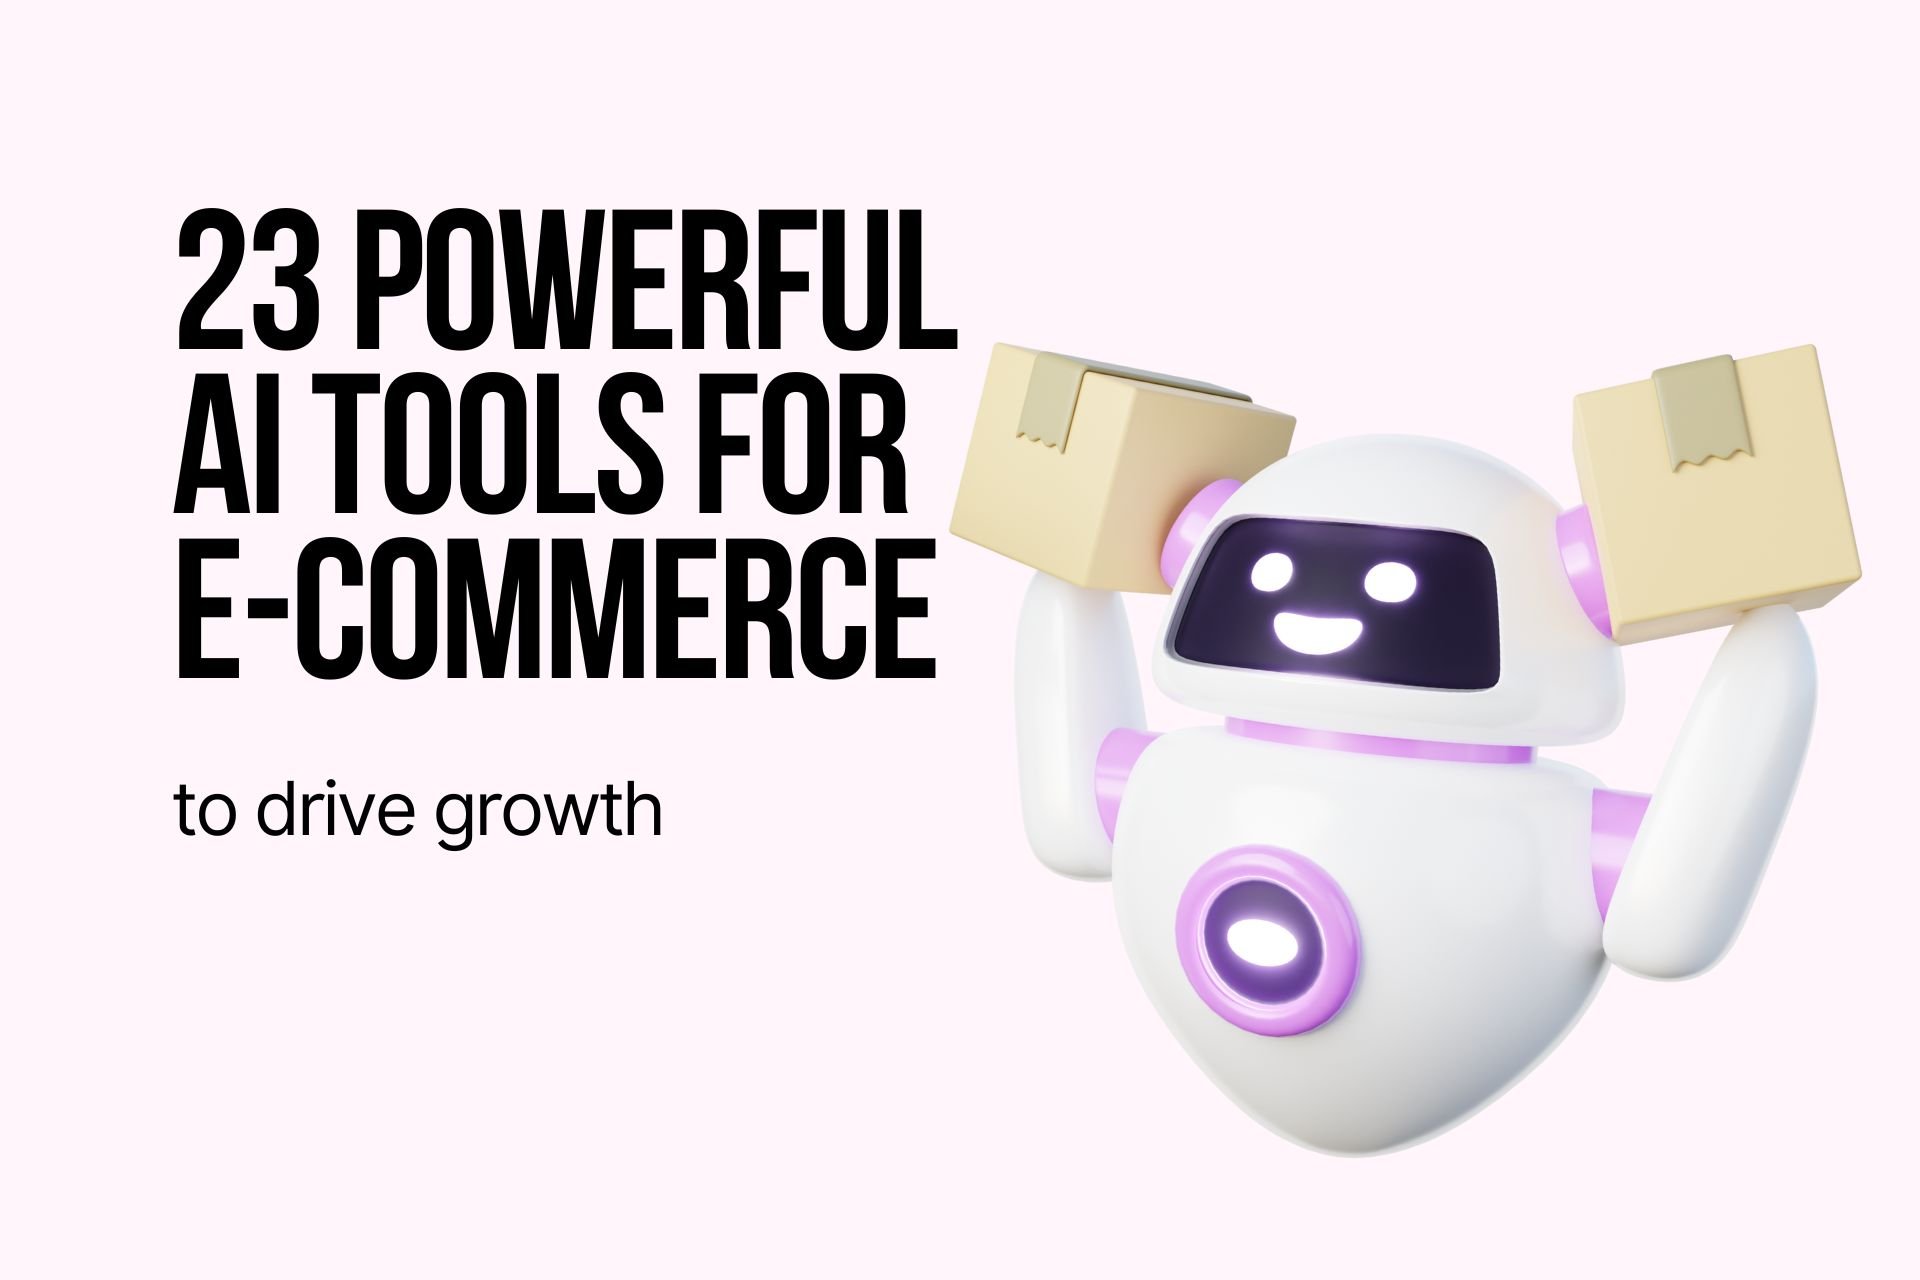 a cover image that says "23 powerful AI tools for e-commerce to drive growth" along with a robot holding boxes